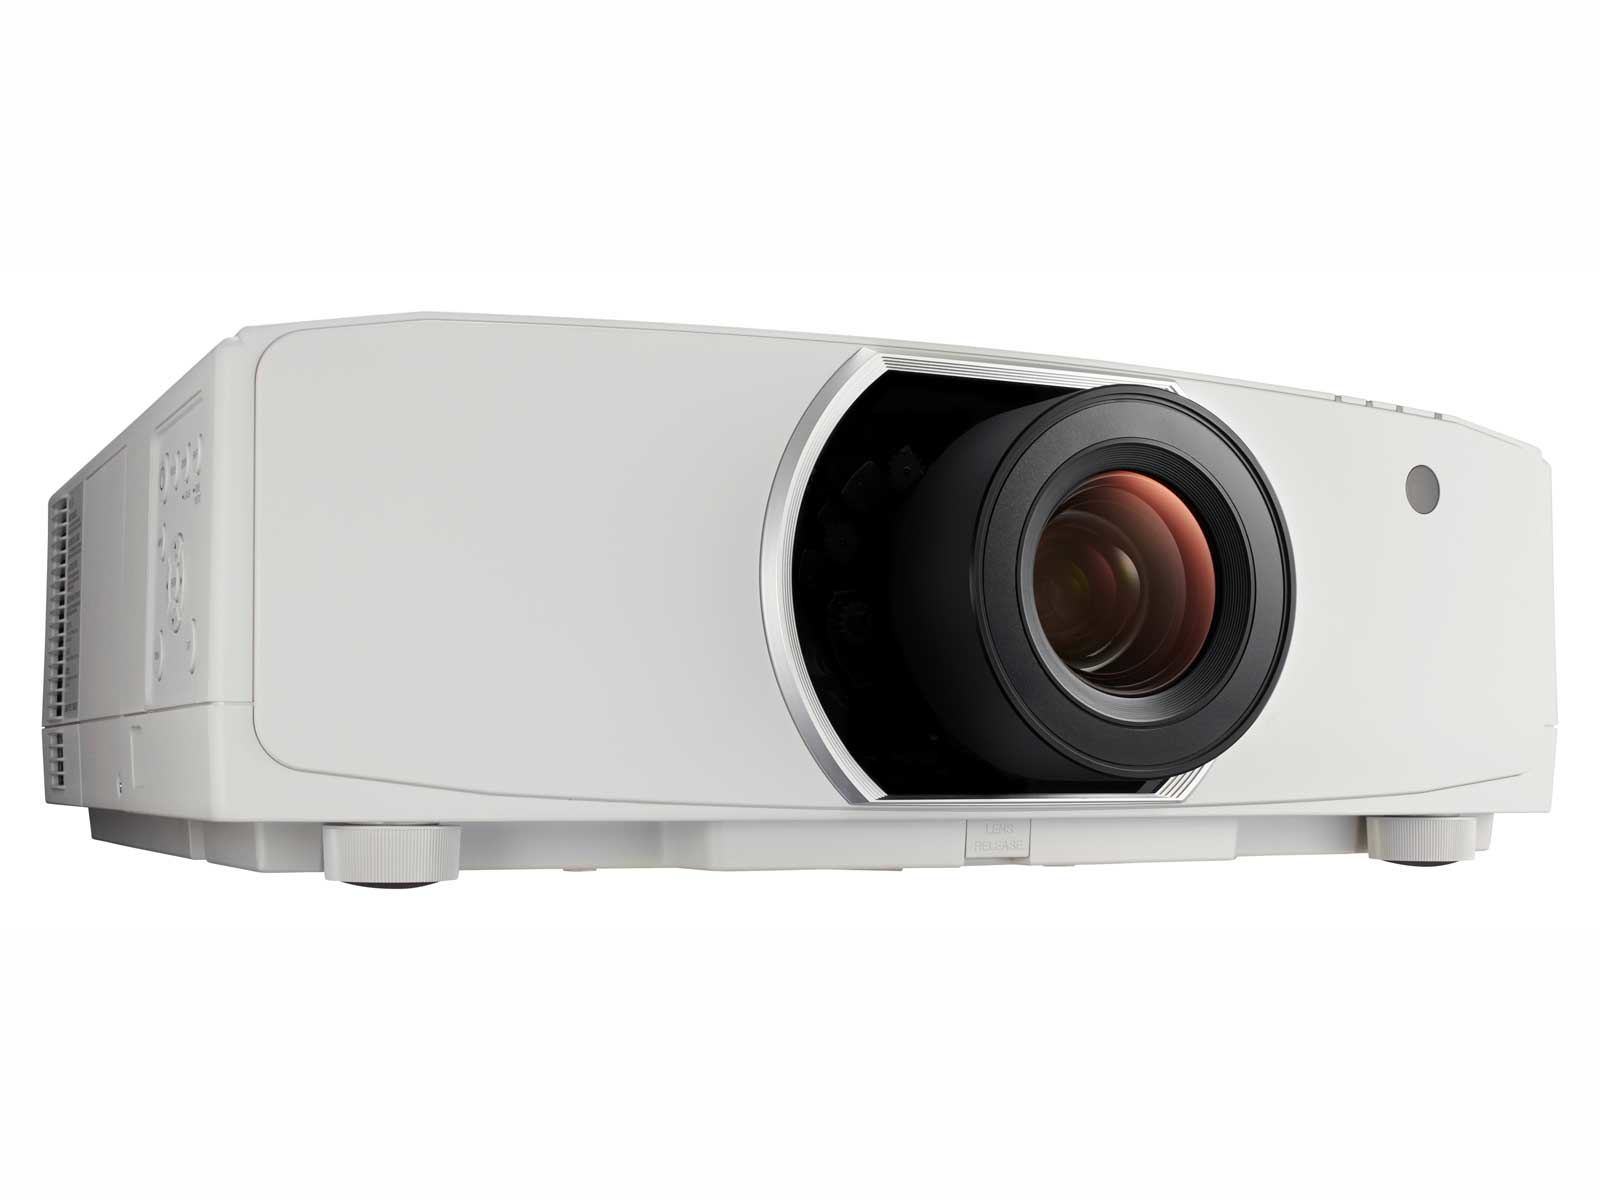 NEC PA703W Projector - 7000 Lumens - WXGA - No Lens Included - Optional Lenses Available